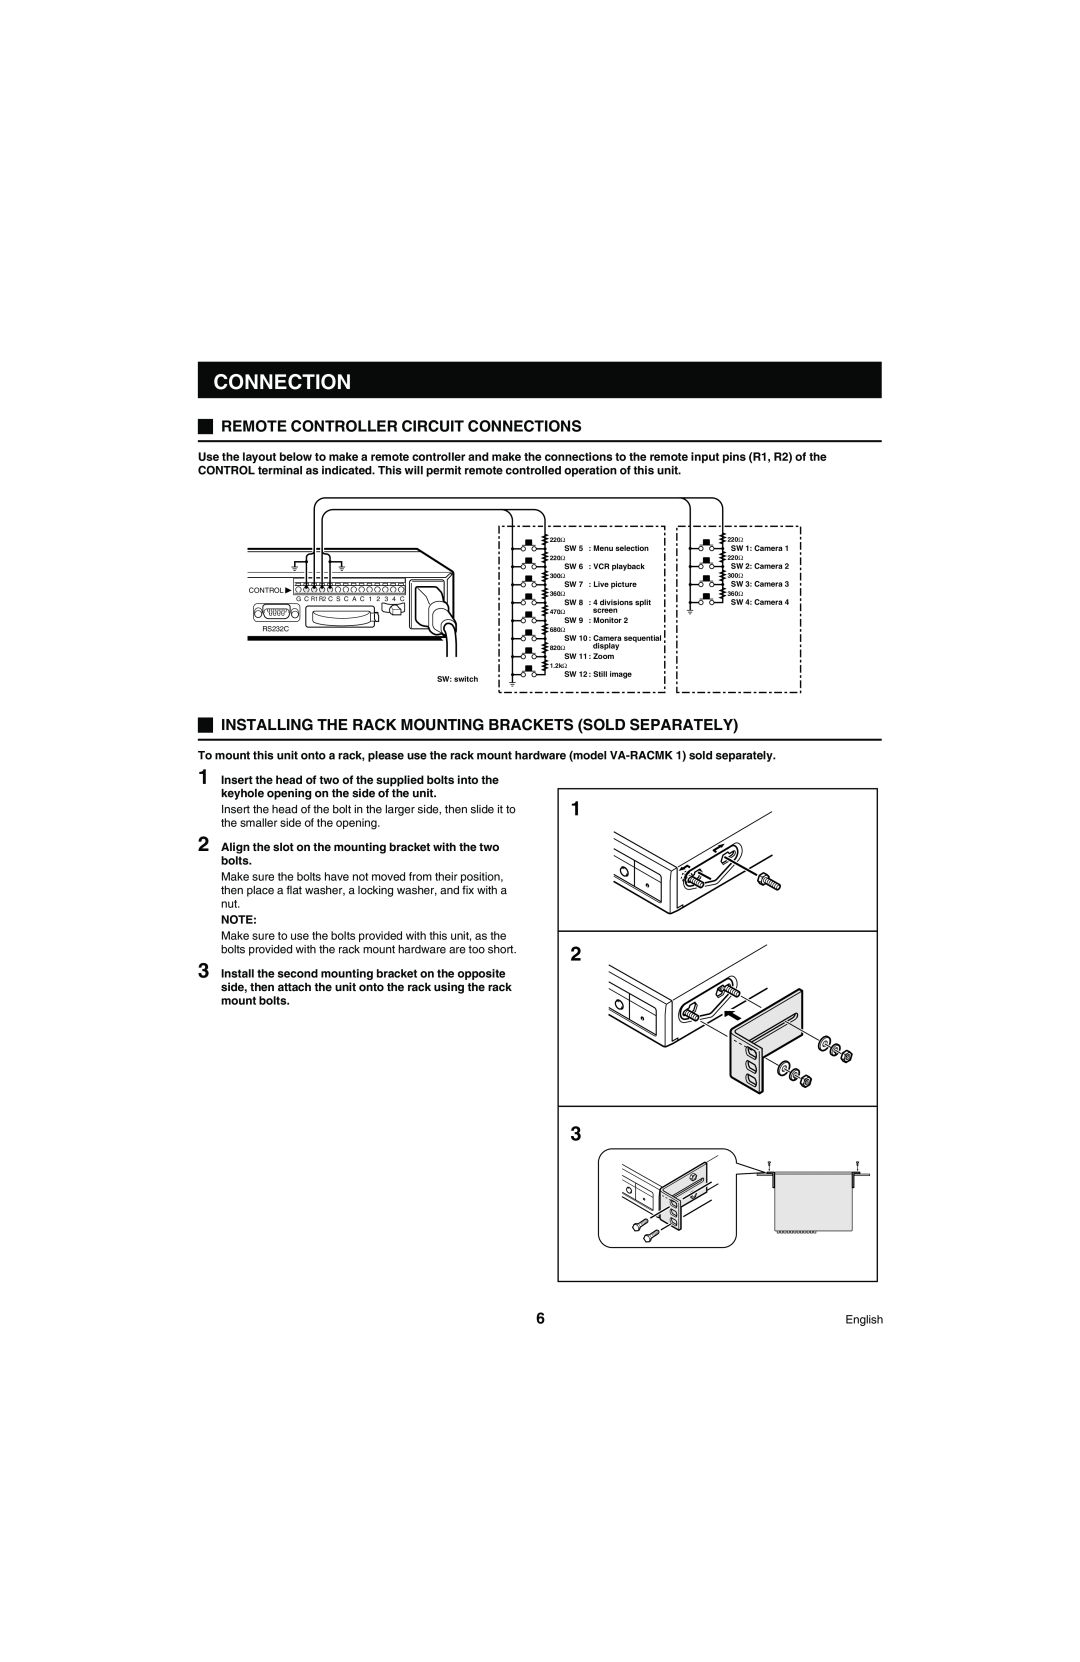 Sanyo MPX-MD4 instruction manual Remote Controller Circuit Connections 